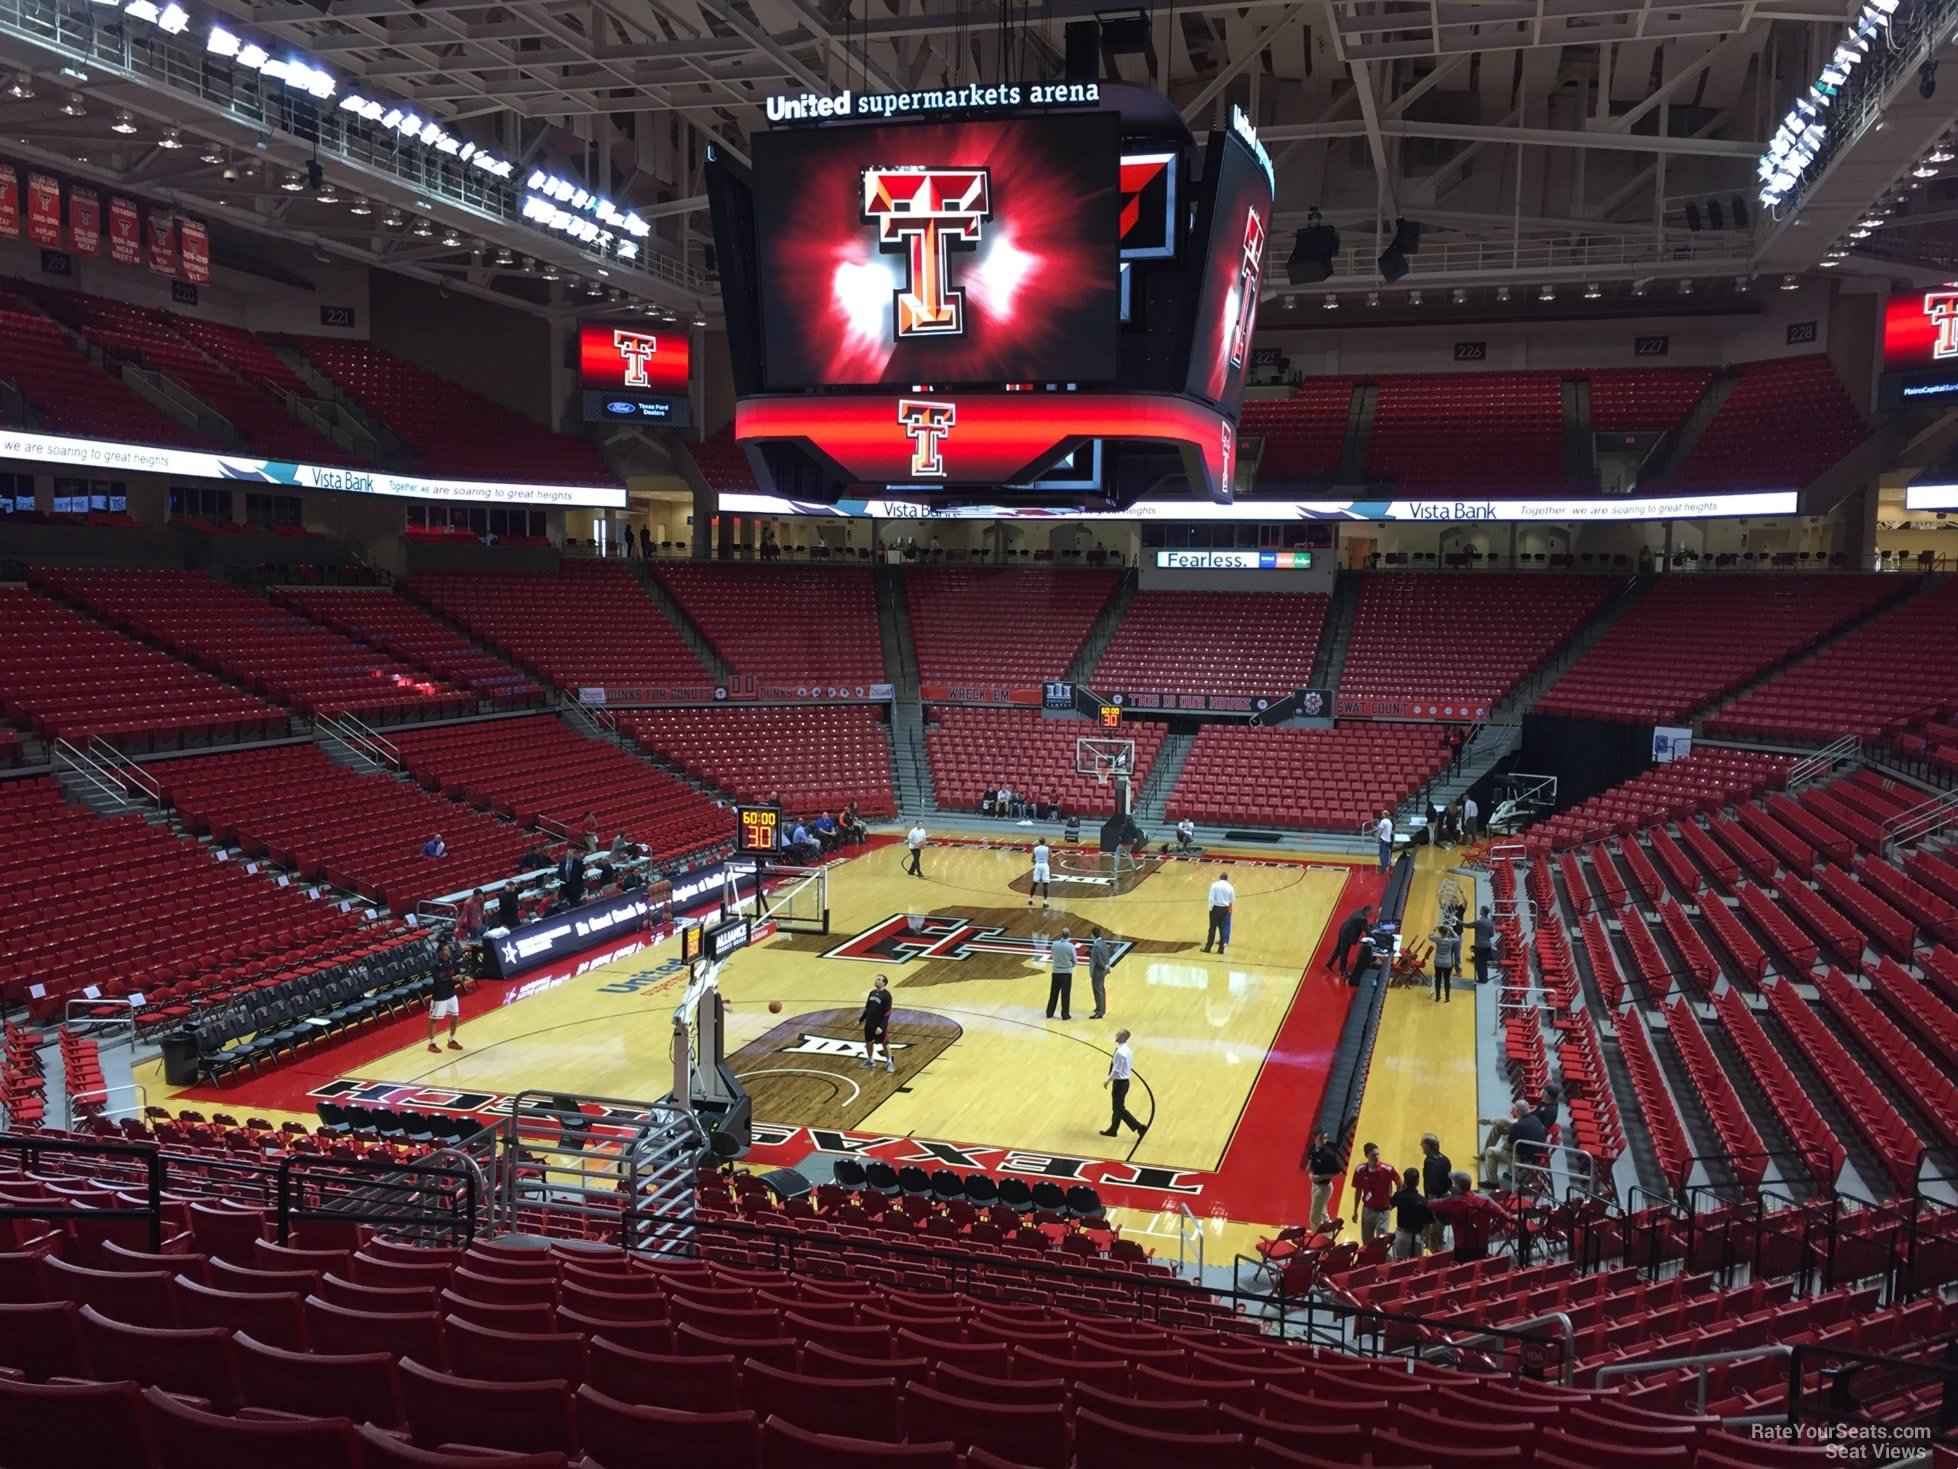 section 107, row 25 seat view  - united supermarkets arena